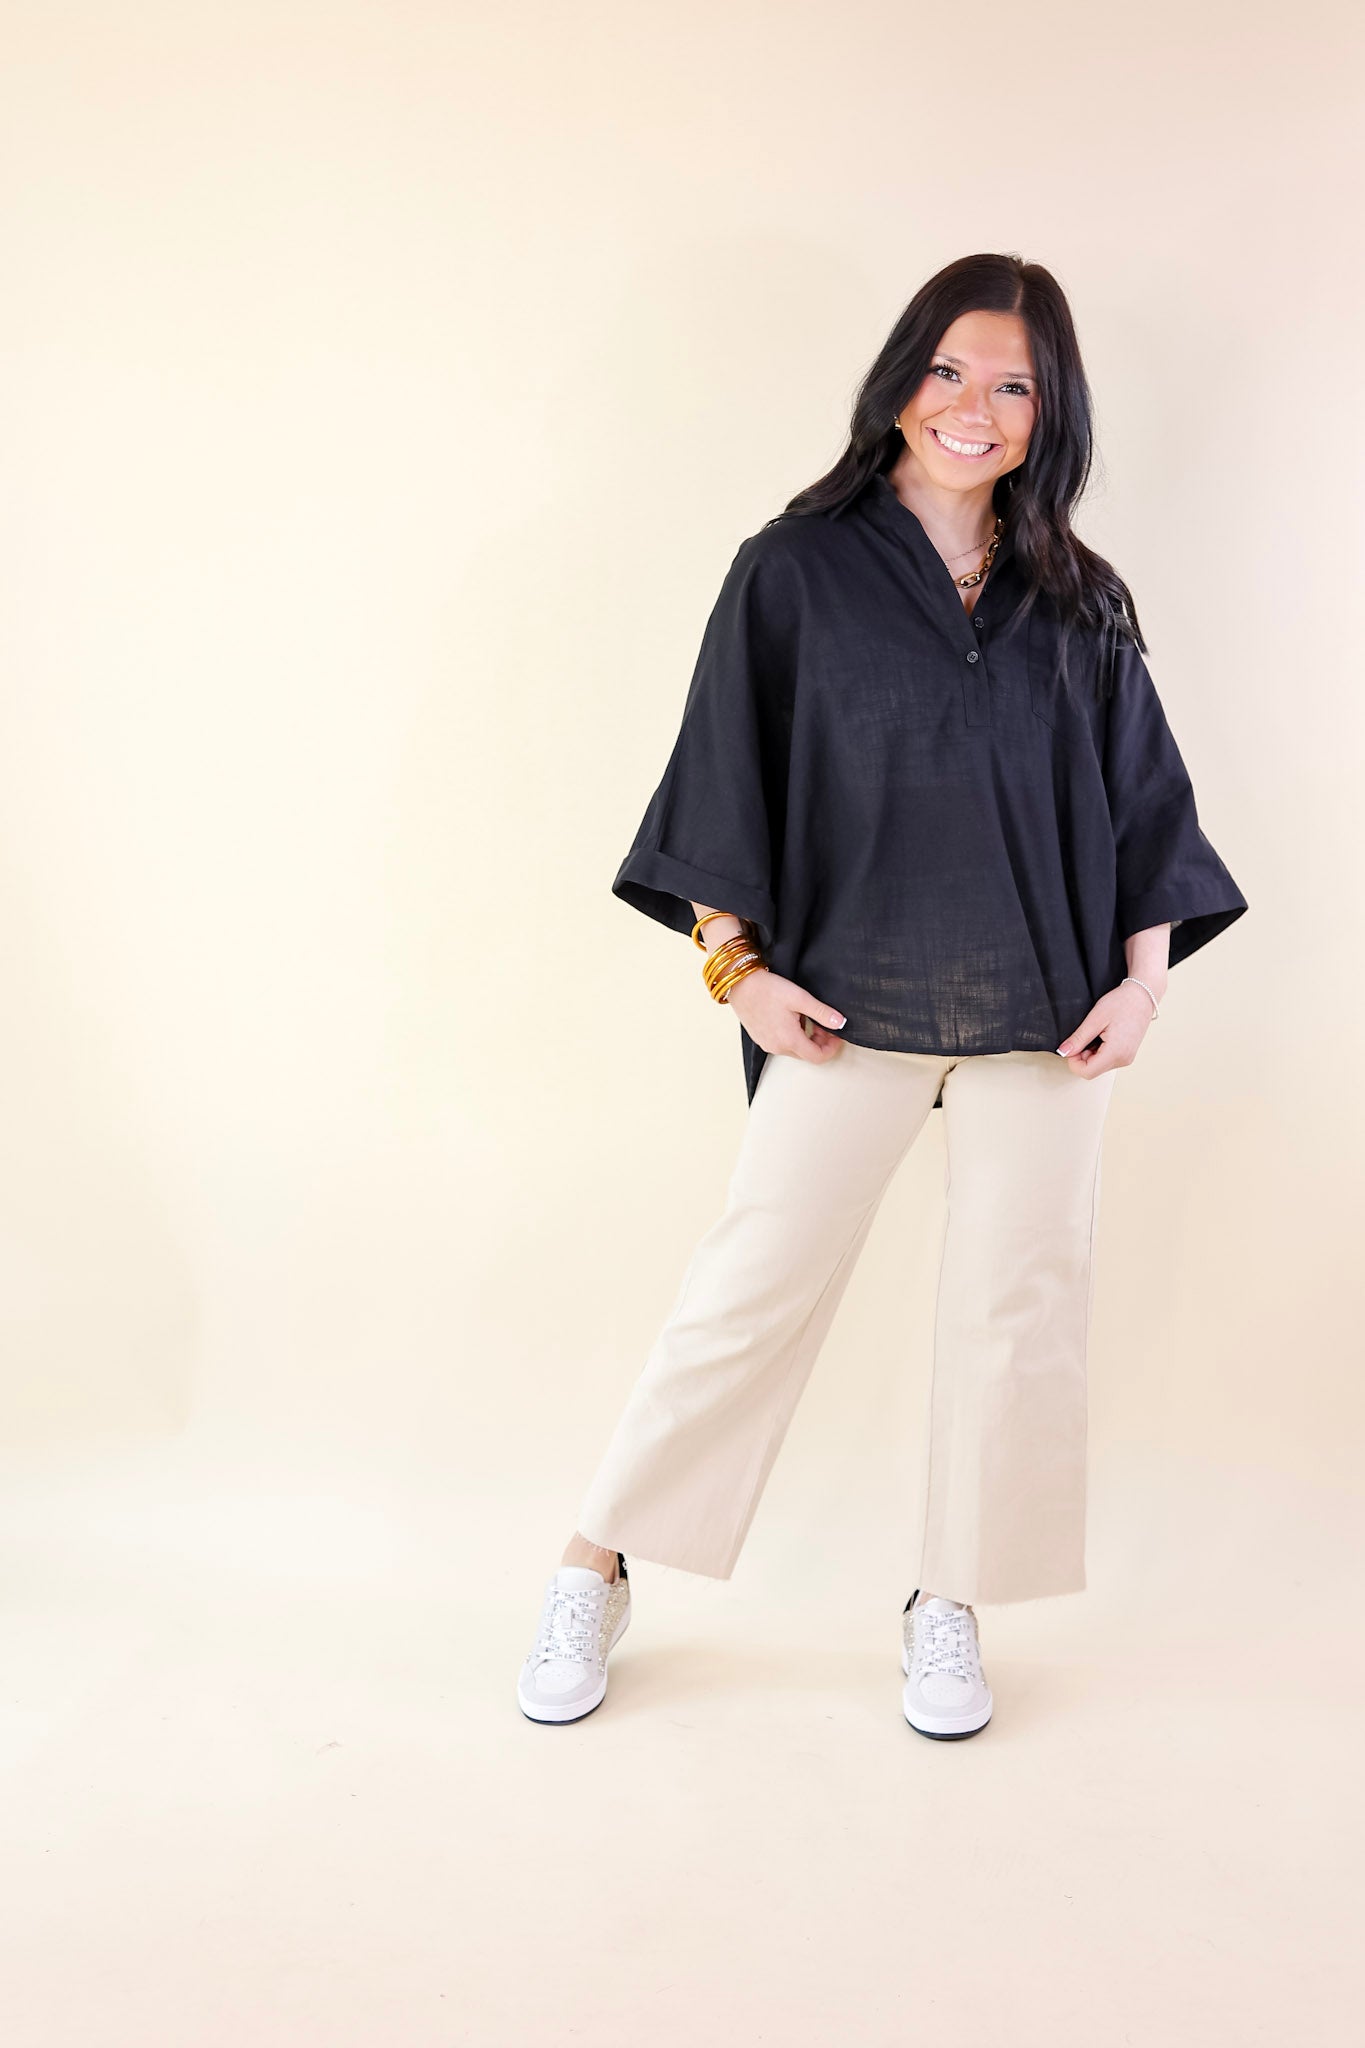 Sweet Surprise Half Button Up Poncho Top with Collared Neckline in Black - Giddy Up Glamour Boutique